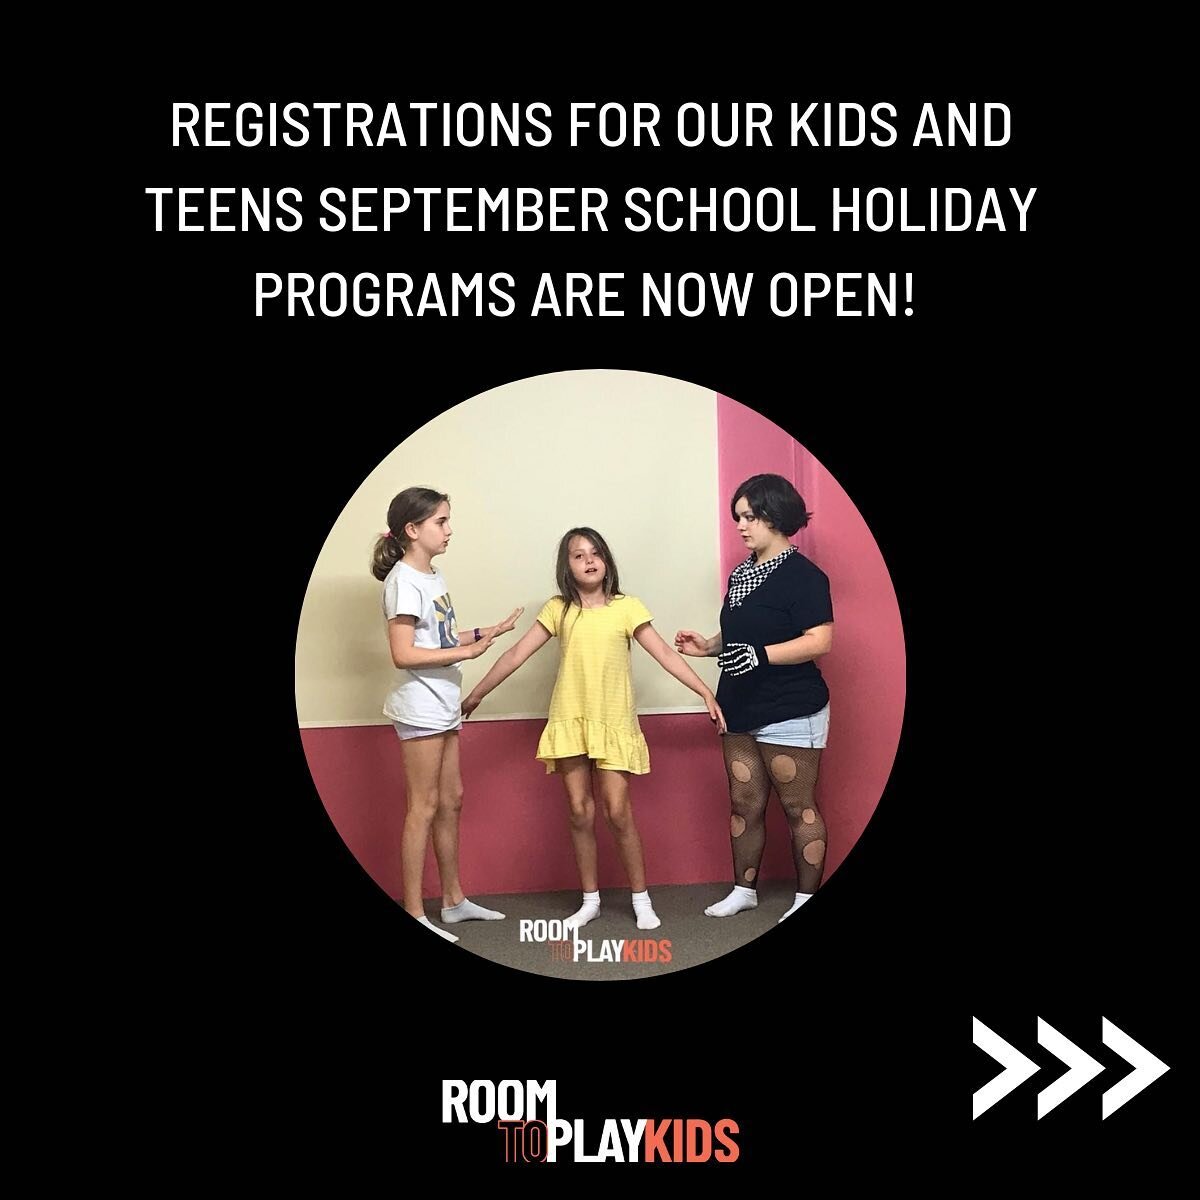 It&rsquo;s the final week of term at our Kids Drama Studio. Time flies when you&rsquo;re having so much fun nurturing your creativity!

At Room to Play Kids, we&rsquo;re offering two school holiday programs: one for primary aged students and one for 